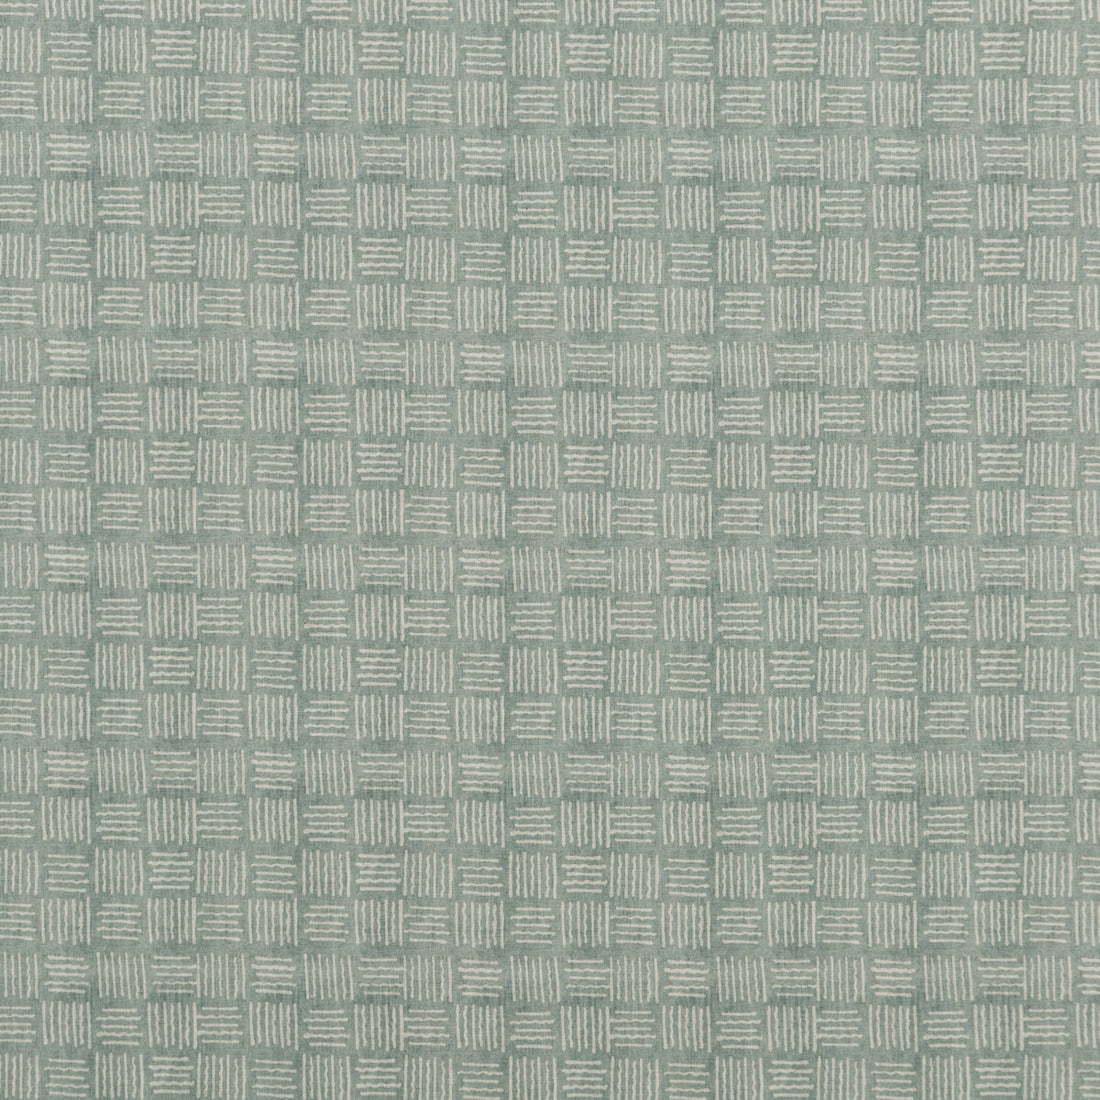 Salsa Square fabric in aqua color - pattern PP50441.3.0 - by Baker Lifestyle in the Carnival collection